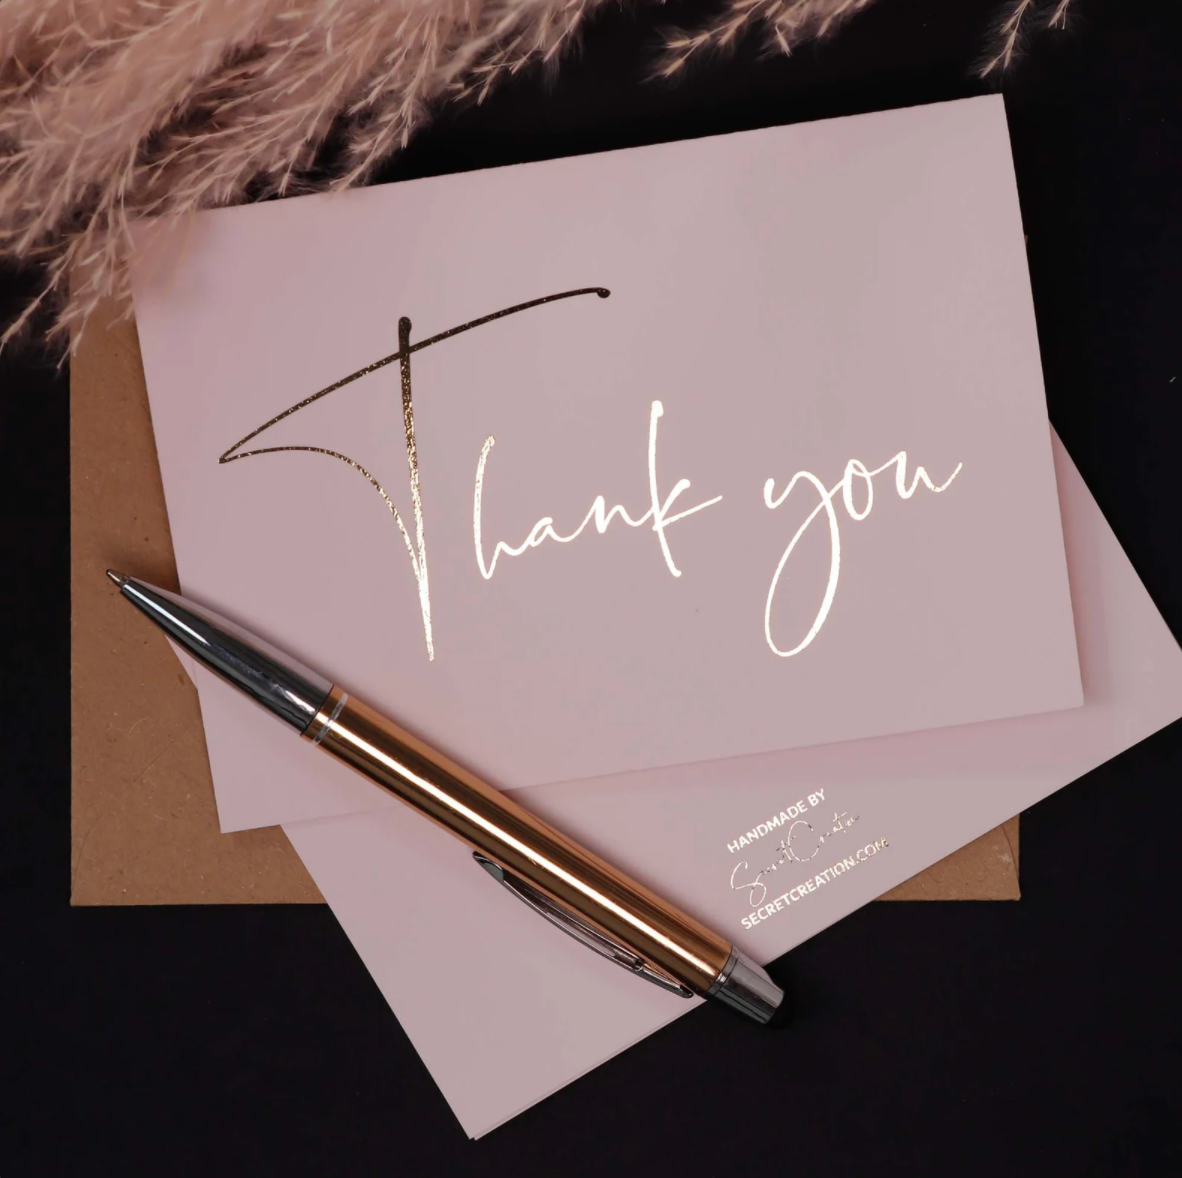 11 Wedding Thank-You Card Wording Examples (Plus a Template!)